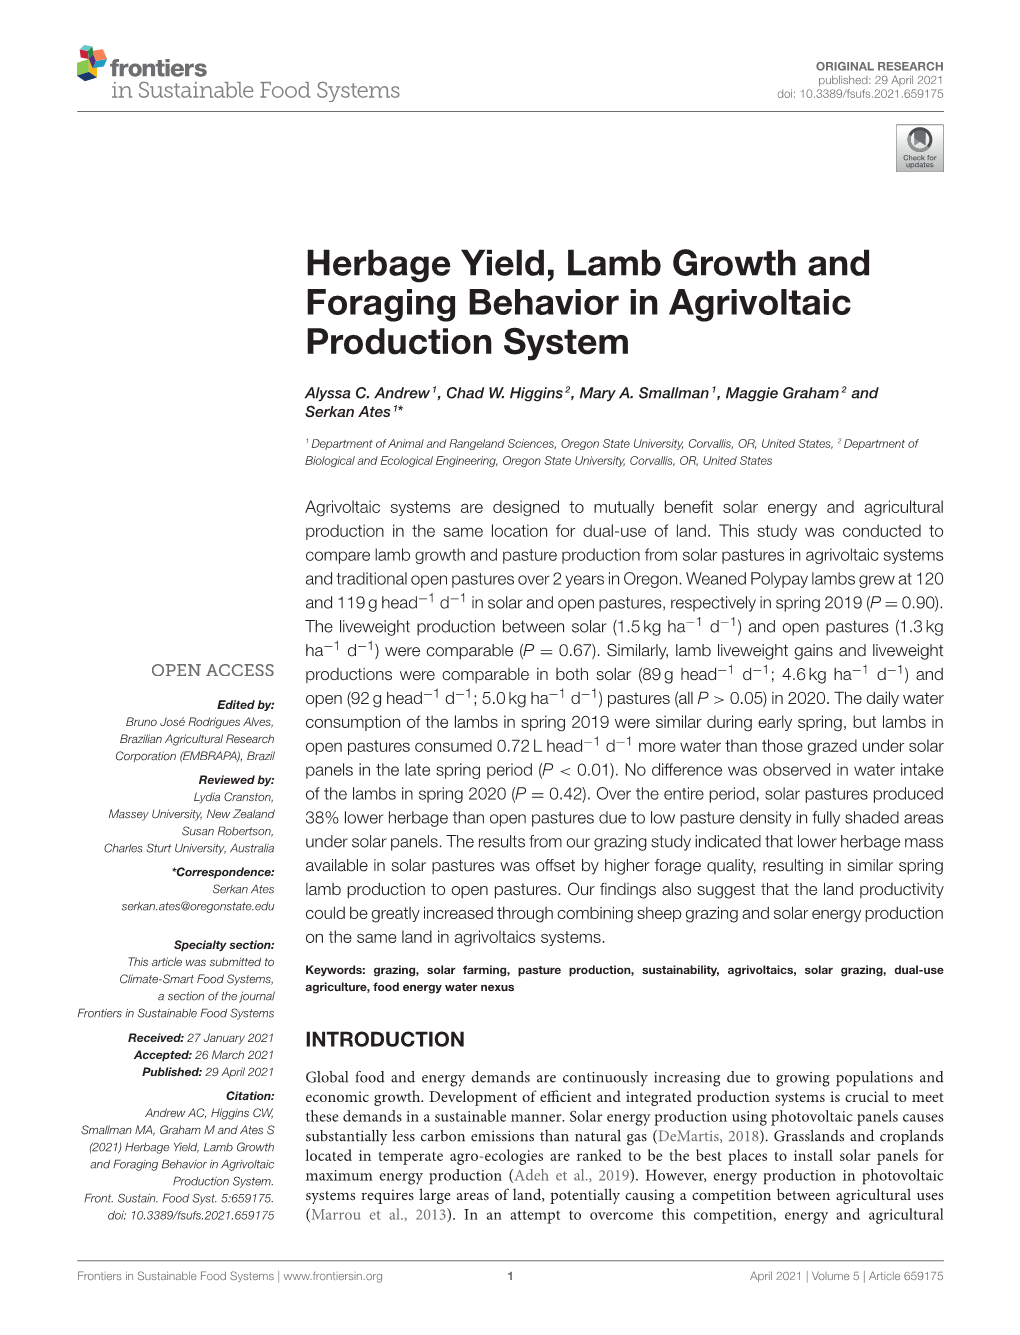 Herbage Yield, Lamb Growth and Foraging Behavior in Agrivoltaic Production System